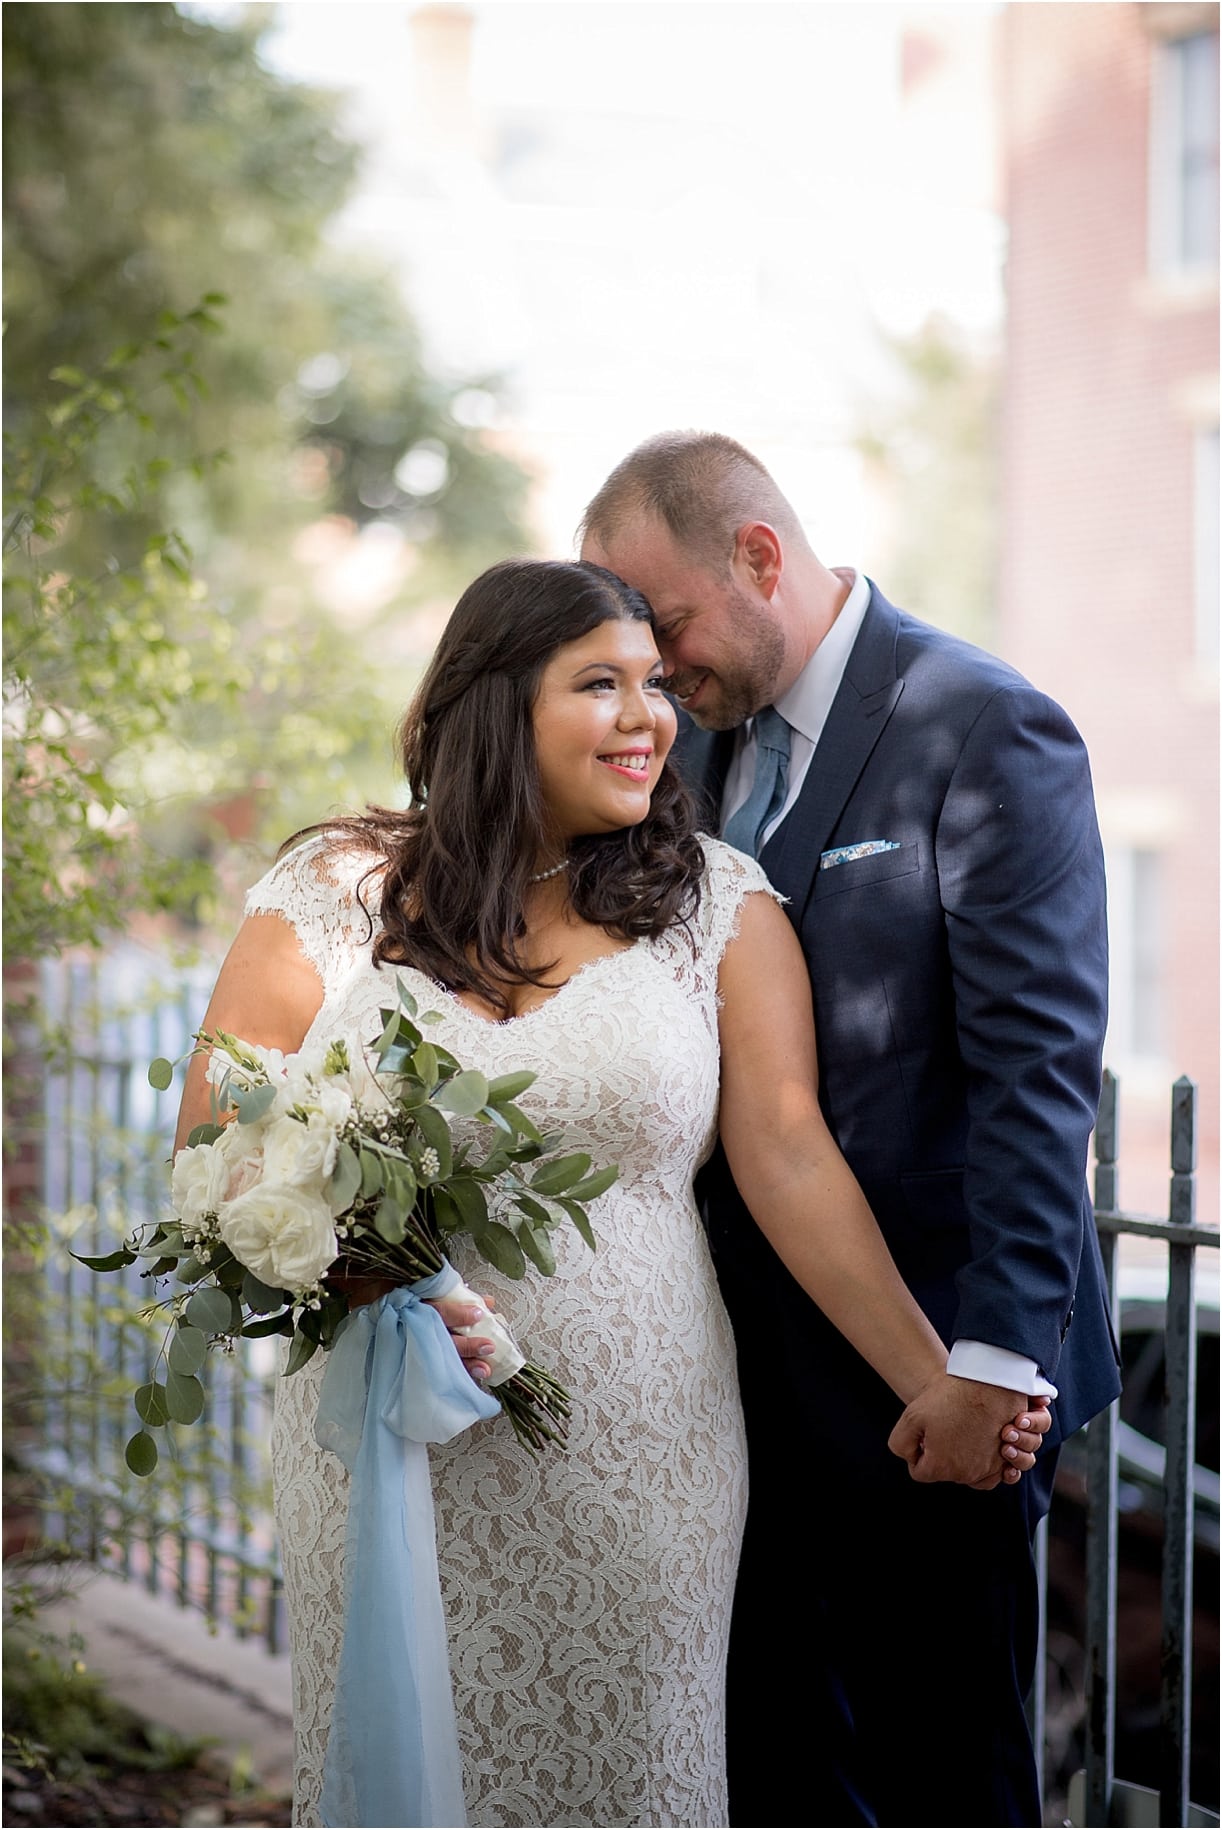 Blue Outdoor Wedding in Alexandria Virginia with Perfect Details | Hill City Bride Blog for Ideas and Inspiration Flowers Groom